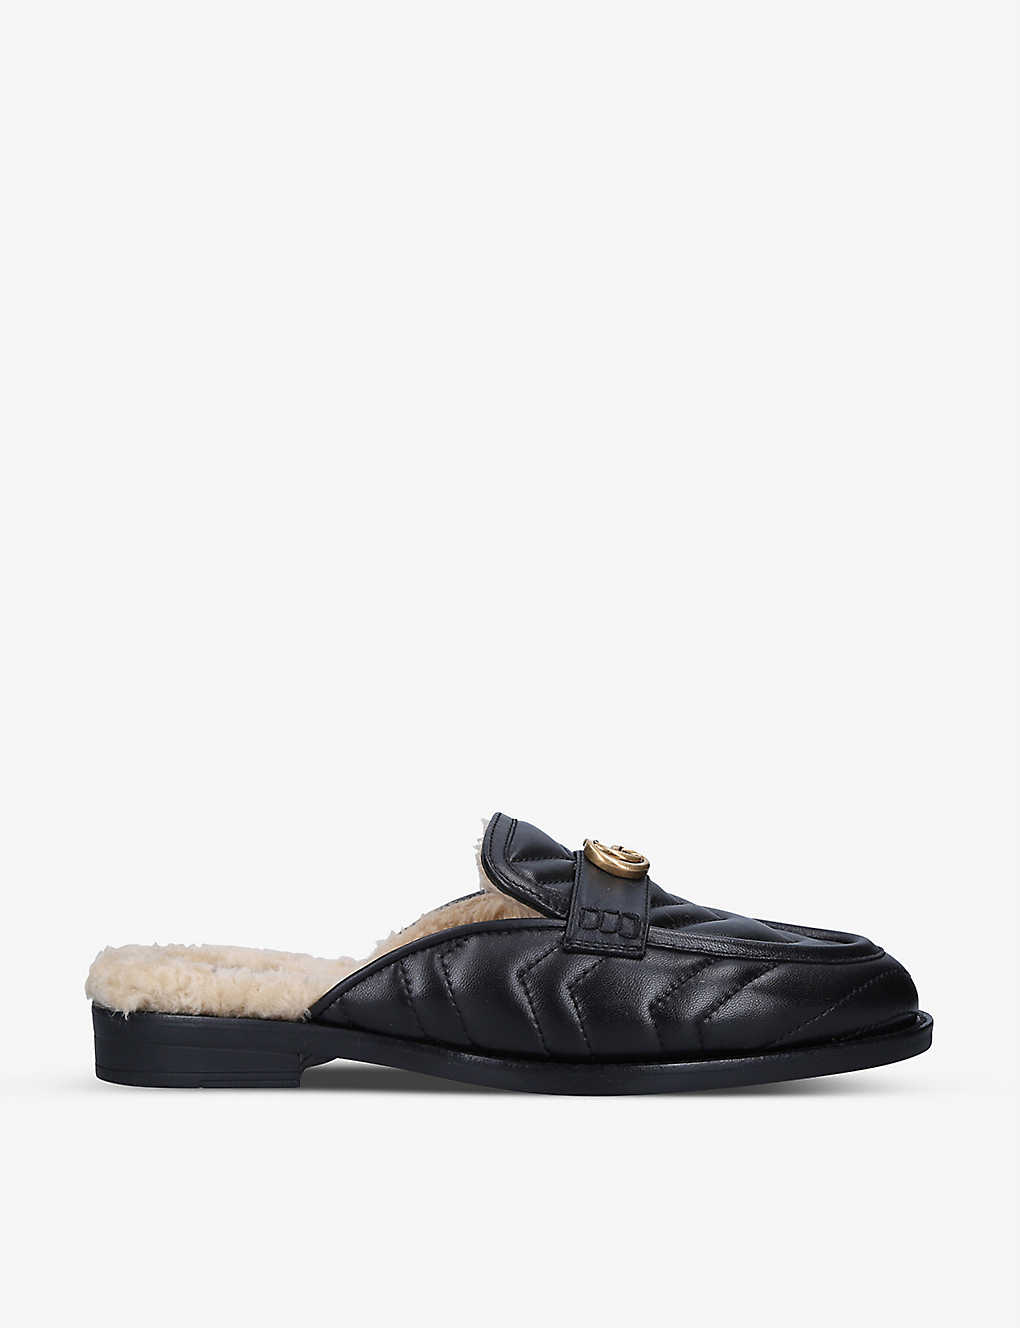 GUCCI Women's Marmont shearling-lined leather mules